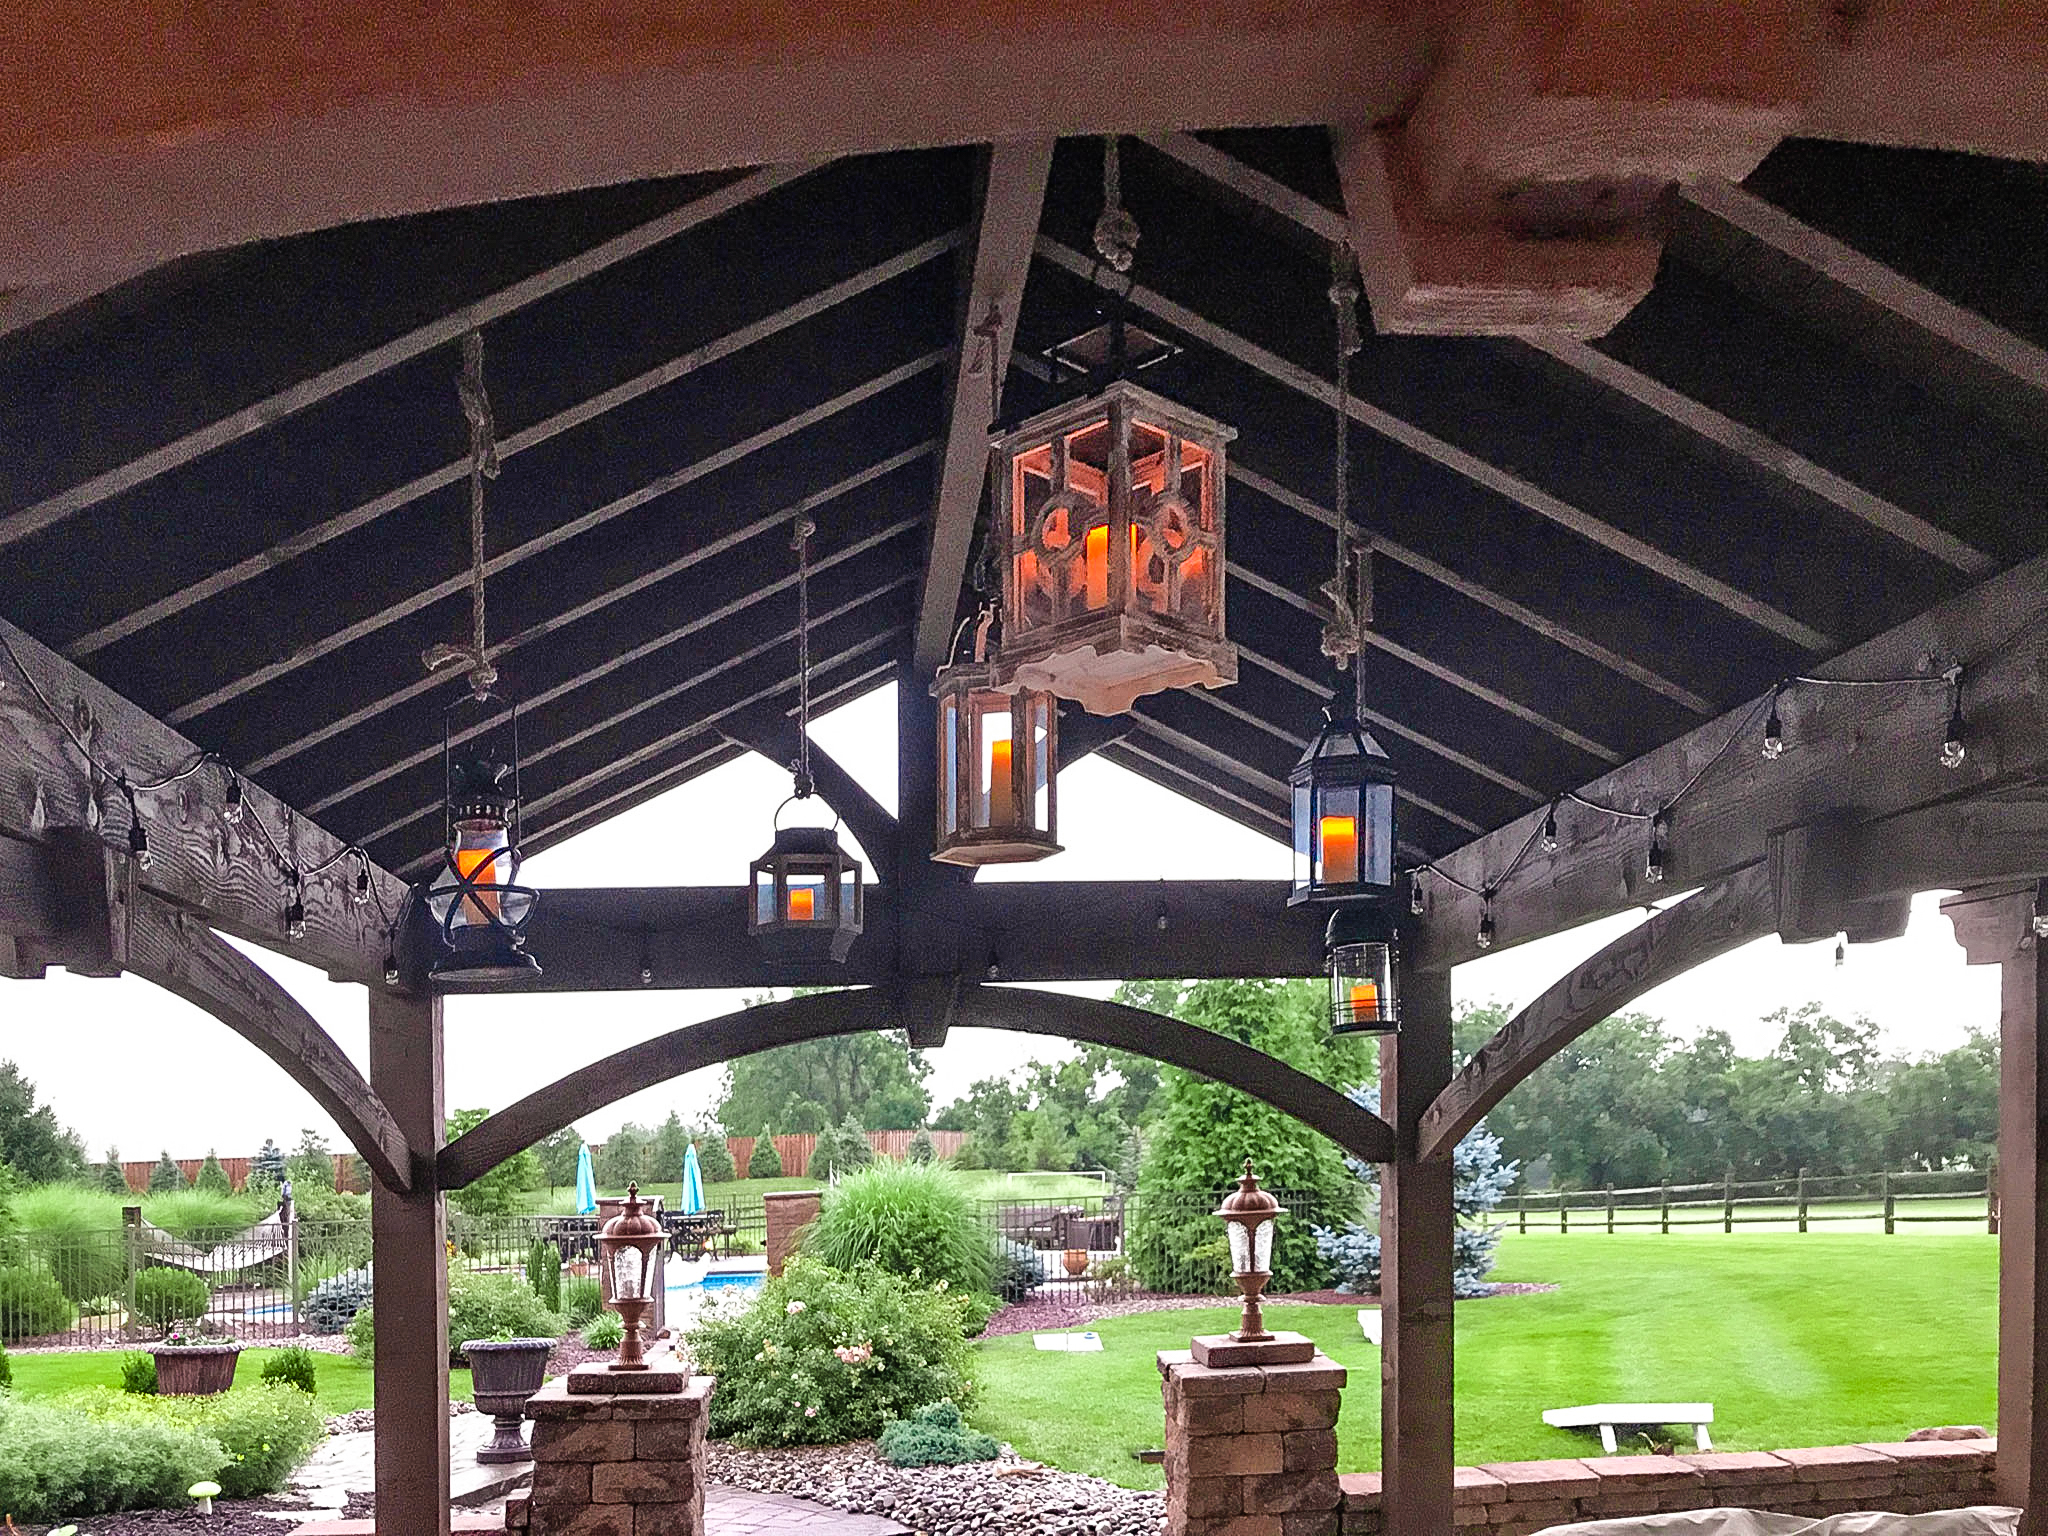 Lanterns from pavilion roof hang